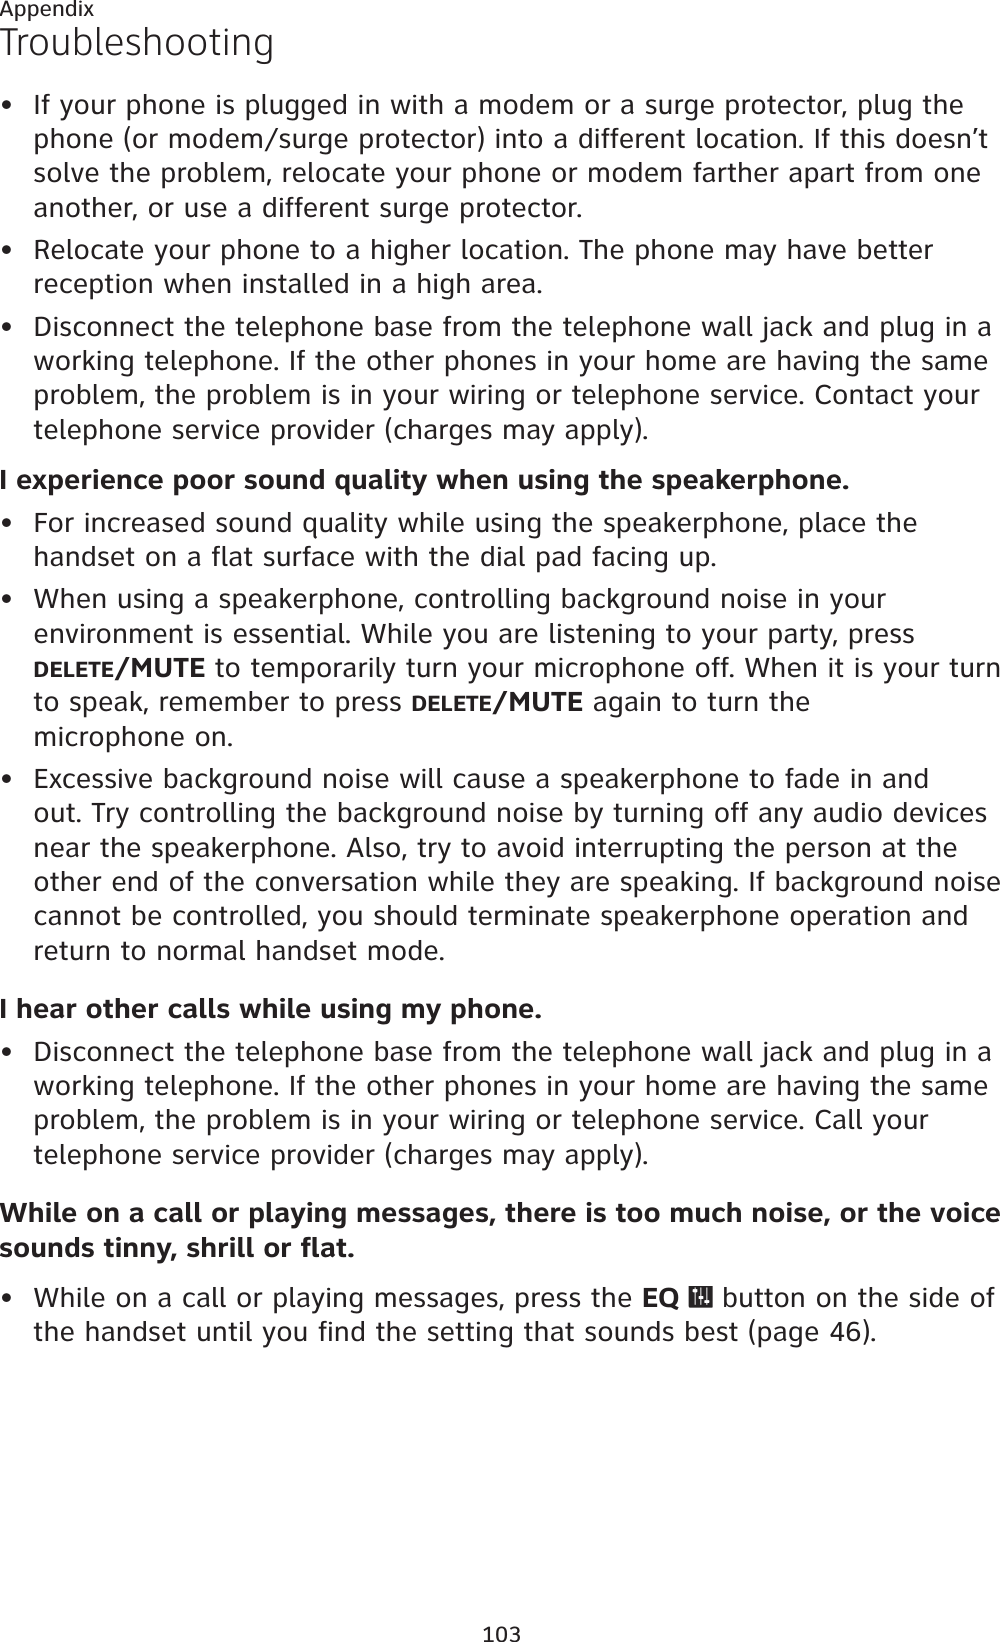 103AppendixTroubleshootingIf your phone is plugged in with a modem or a surge protector, plug the phone (or modem/surge protector) into a different location. If this doesn’t solve the problem, relocate your phone or modem farther apart from one another, or use a different surge protector.Relocate your phone to a higher location. The phone may have better reception when installed in a high area.Disconnect the telephone base from the telephone wall jack and plug in a working telephone. If the other phones in your home are having the same problem, the problem is in your wiring or telephone service. Contact your telephone service provider (charges may apply).I experience poor sound quality when using the speakerphone.For increased sound quality while using the speakerphone, place the handset on a flat surface with the dial pad facing up.When using a speakerphone, controlling background noise in your environment is essential. While you are listening to your party, press DELETE/MUTE to temporarily turn your microphone off. When it is your turn to speak, remember to press DELETE/MUTE again to turn the microphone on.Excessive background noise will cause a speakerphone to fade in and out. Try controlling the background noise by turning off any audio devices near the speakerphone. Also, try to avoid interrupting the person at the other end of the conversation while they are speaking. If background noise cannot be controlled, you should terminate speakerphone operation and return to normal handset mode.I hear other calls while using my phone.Disconnect the telephone base from the telephone wall jack and plug in a working telephone. If the other phones in your home are having the same problem, the problem is in your wiring or telephone service. Call your telephone service provider (charges may apply).While on a call or playing messages, there is too much noise, or the voice sounds tinny, shrill or flat.While on a call or playing messages, press the EQ   button on the side of the handset until you find the setting that sounds best (page 46).••••••••